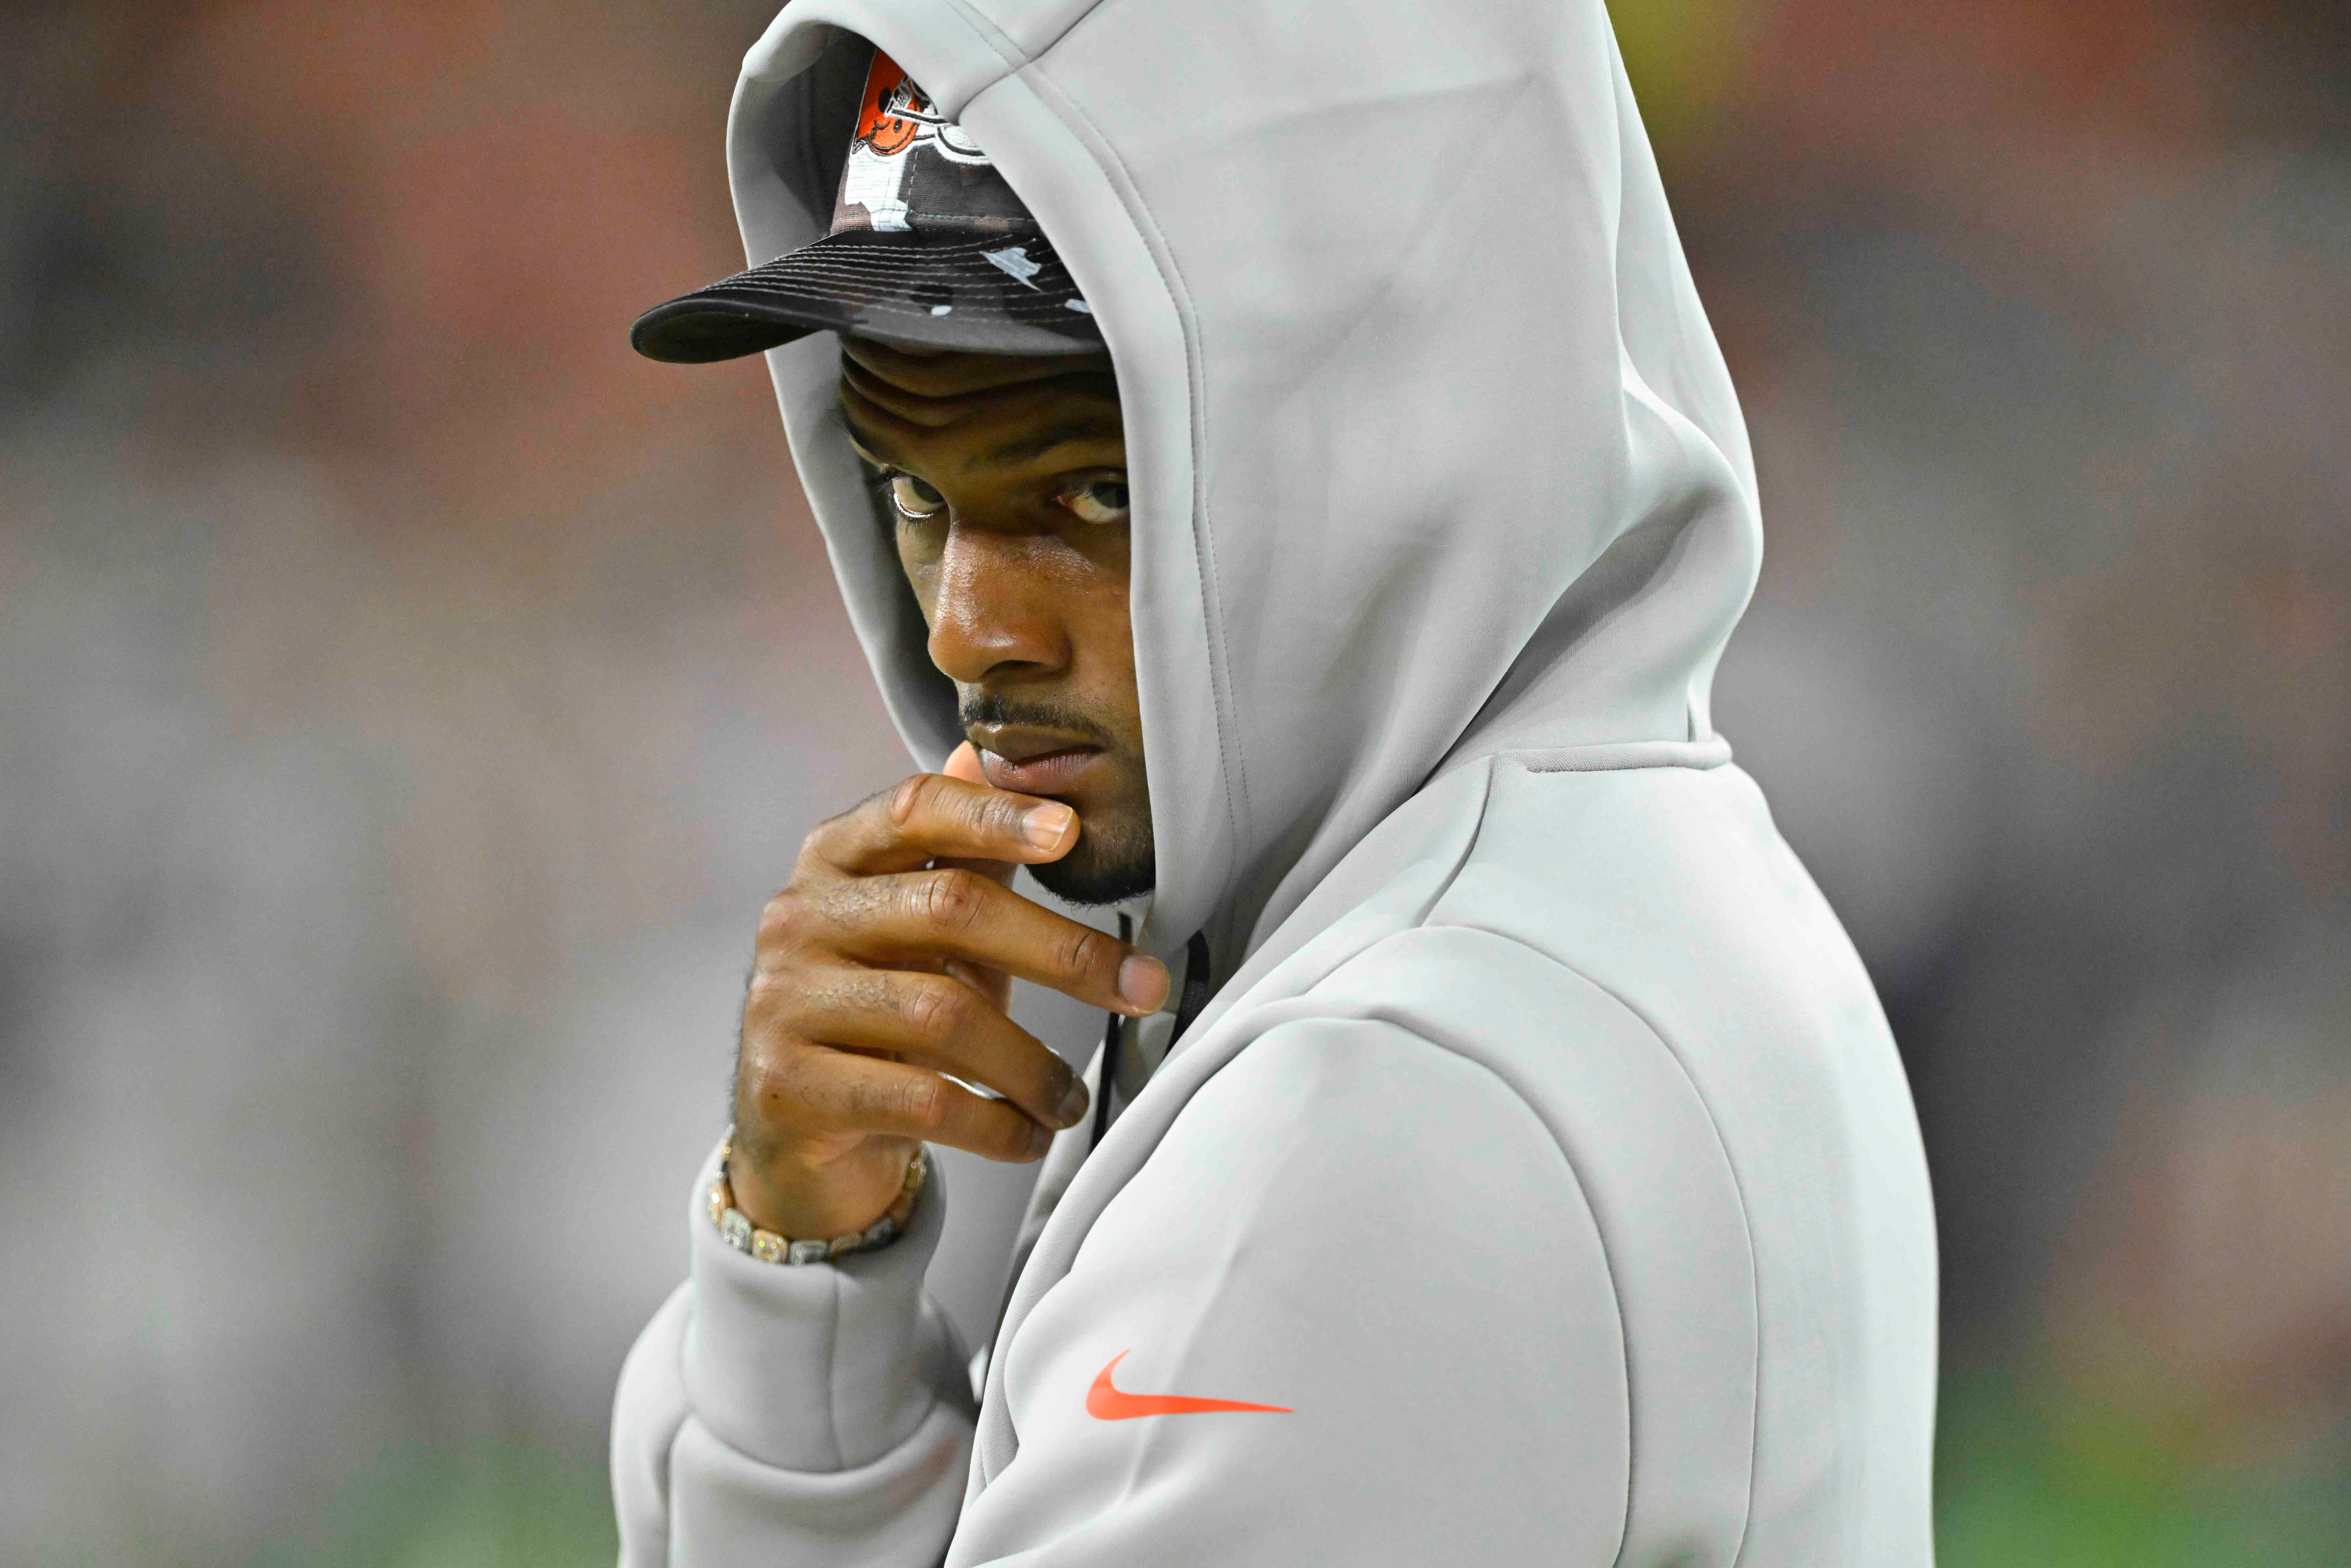 The Cleveland Browns saw DeShaun Watson’s behavior as a PR problem with short-term effects on their brand